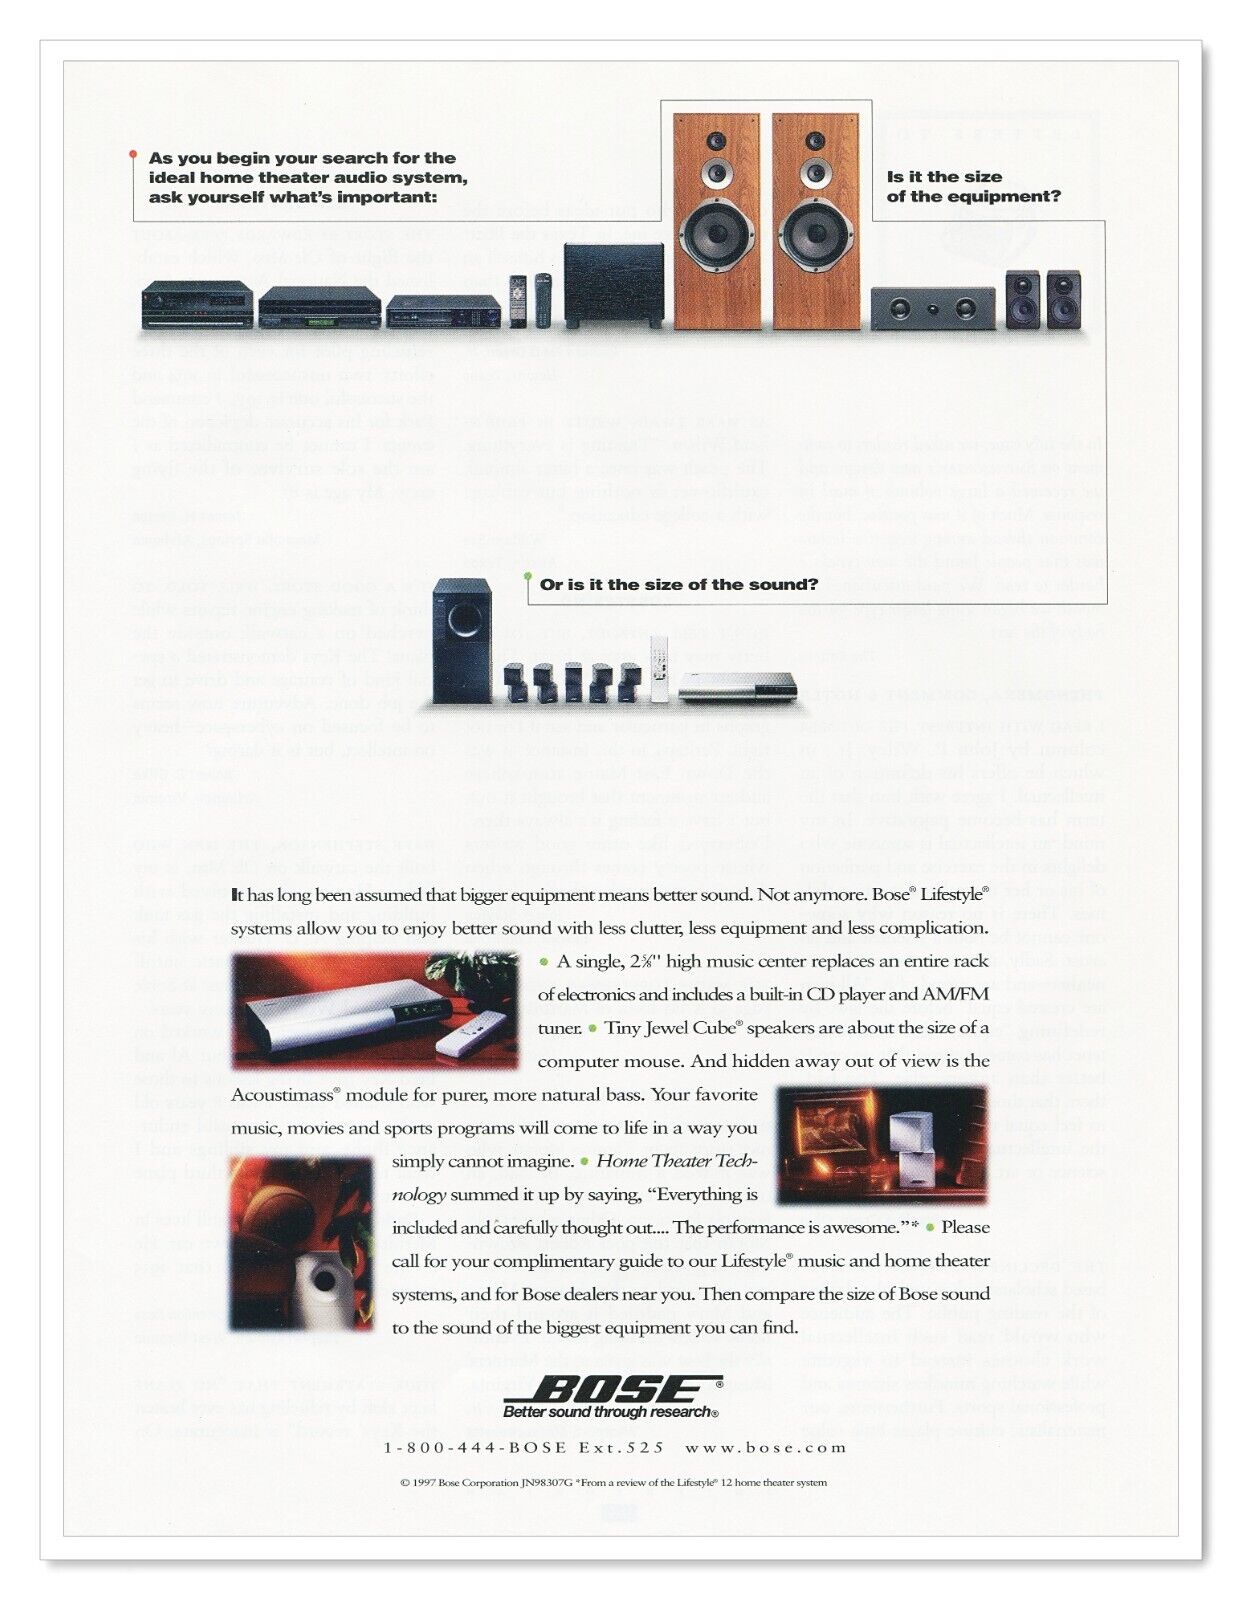 Bose Lifestyle Music & Home Theater System Vintage 1997 Full-Page Magazine Ad